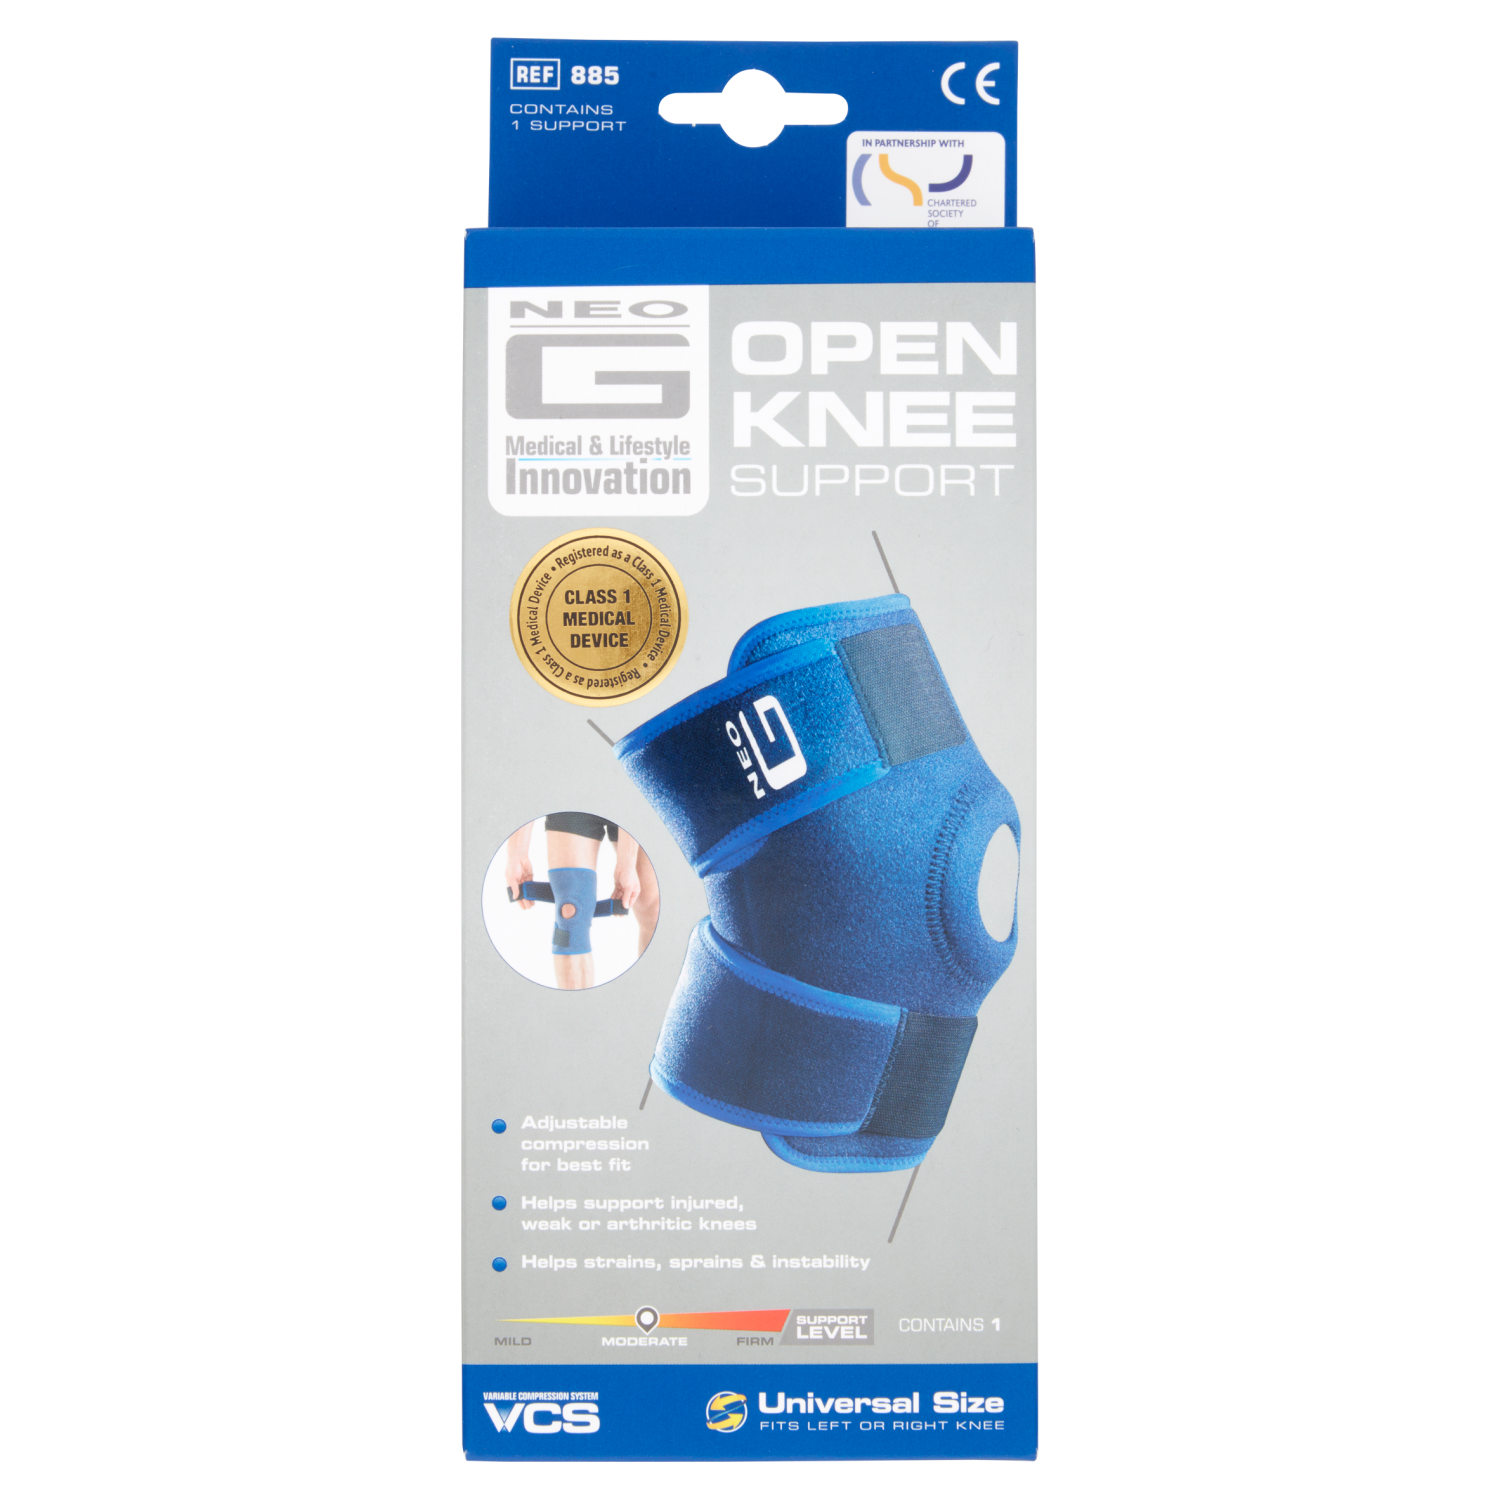 Neo G Hinged Open Knee Support Universal Size